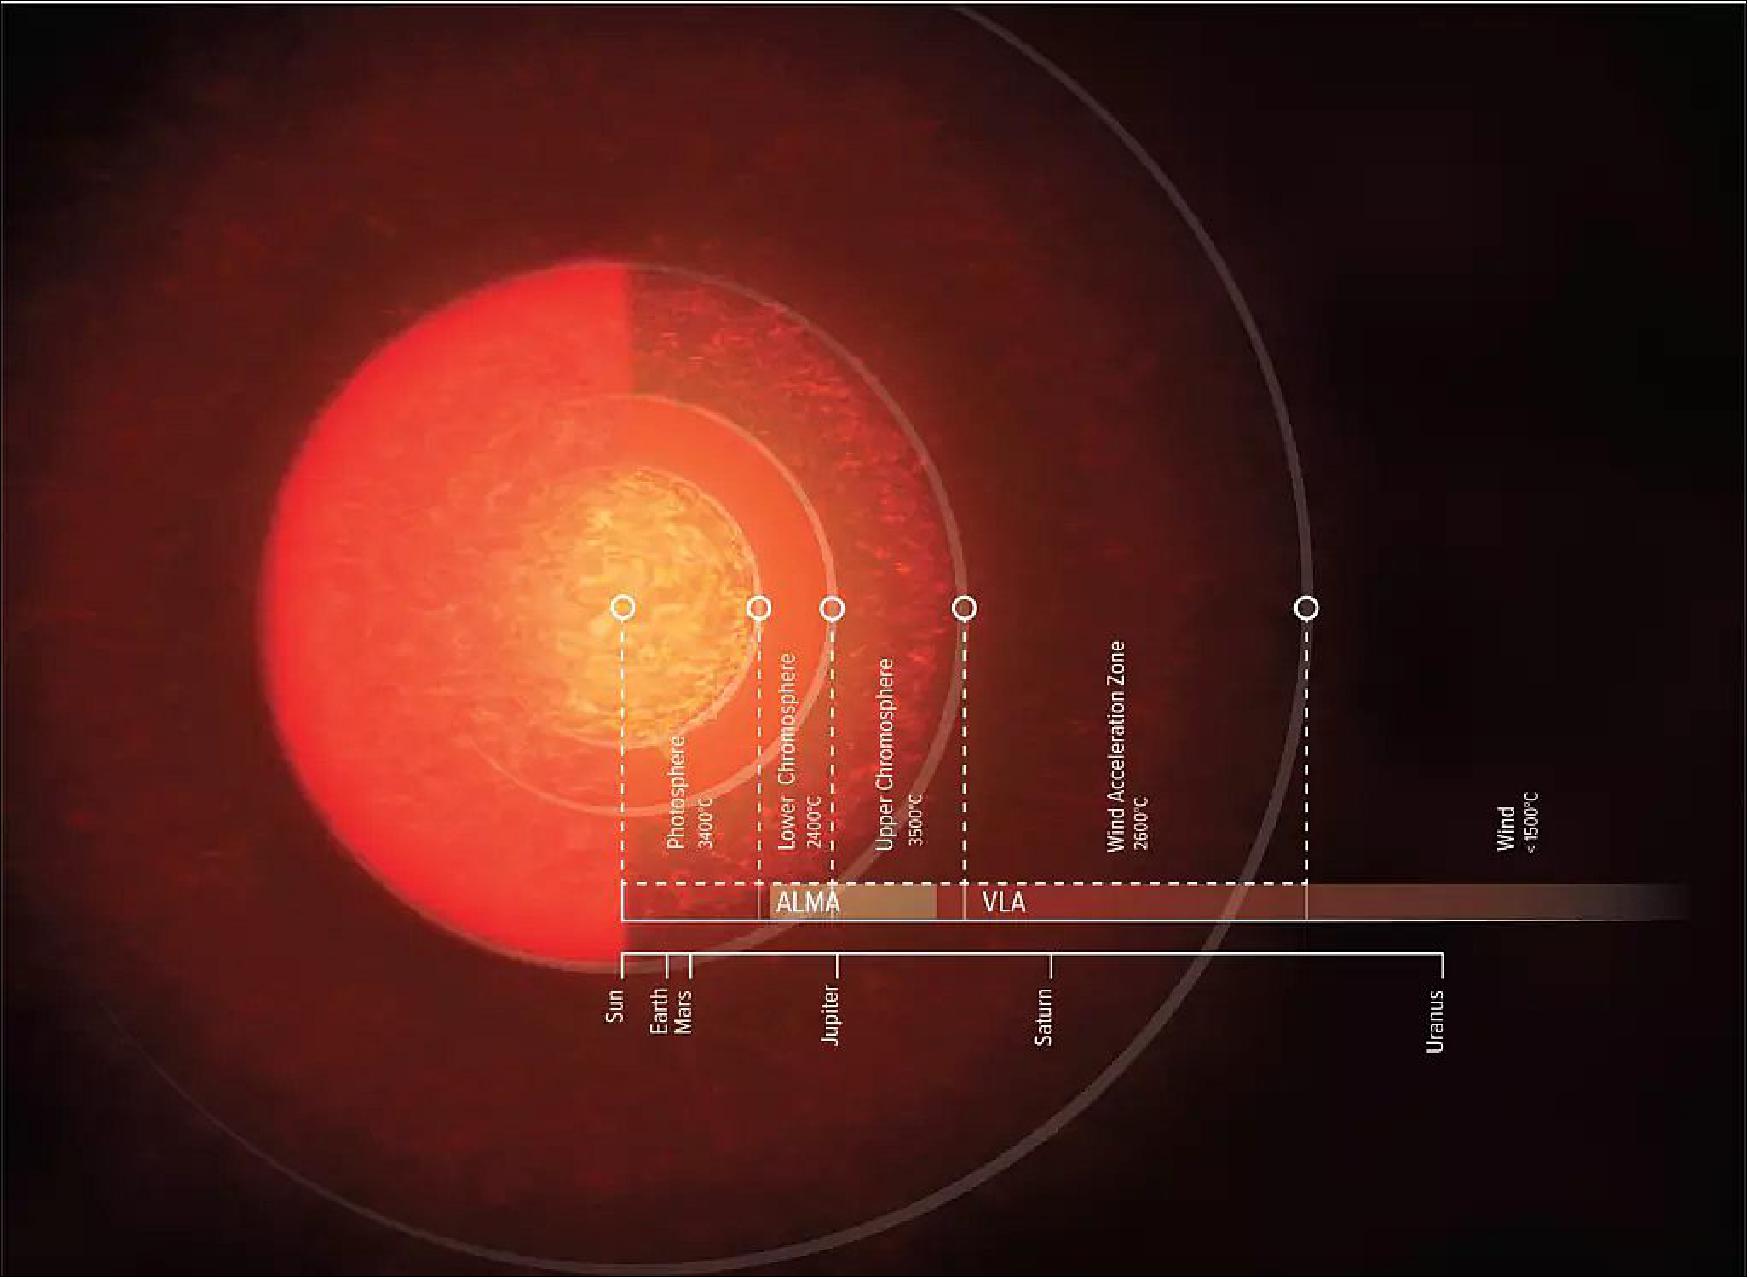 Figure 58: Artist impression of the atmosphere of Antares. As seen with the naked eye (up until the photosphere), Antares is around 700 times larger than our sun, big enough to fill the solar system beyond the orbit of Mars (Solar System scale shown for comparison). But ALMA and VLA showed that its atmosphere, including the lower and upper chromosphere and wind zones, reaches out 12 times farther than that (image credit: NRAO/AUI/NSF, S. Dagnello)